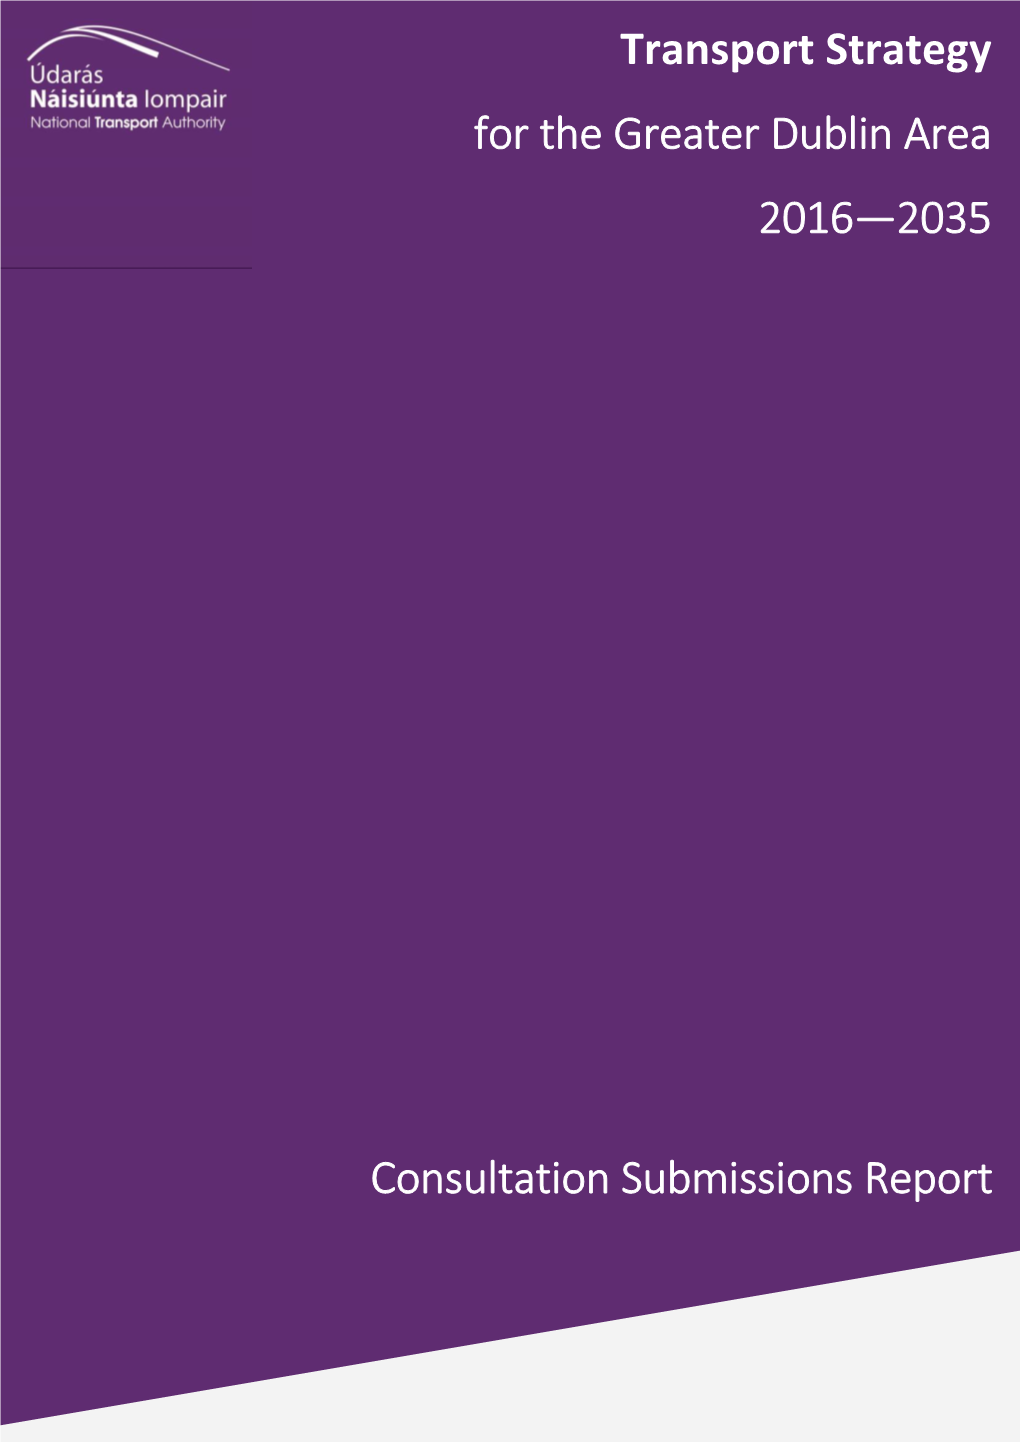 Transport Strategy for the Greater Dublin Area 2016—2035